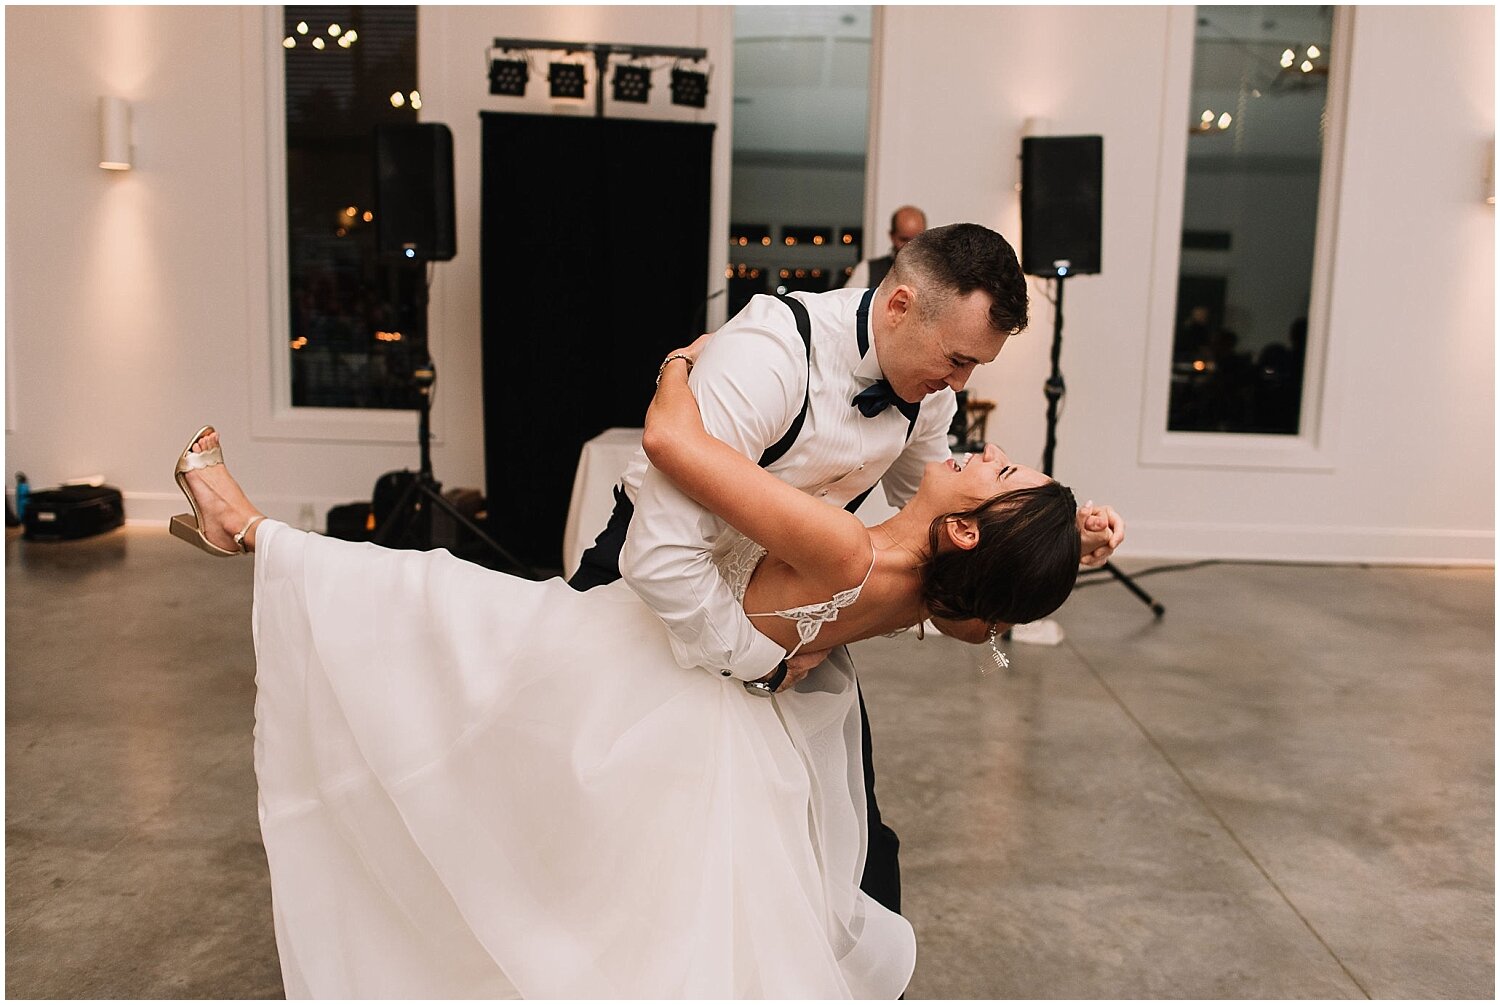  bride and groom’s first dance 